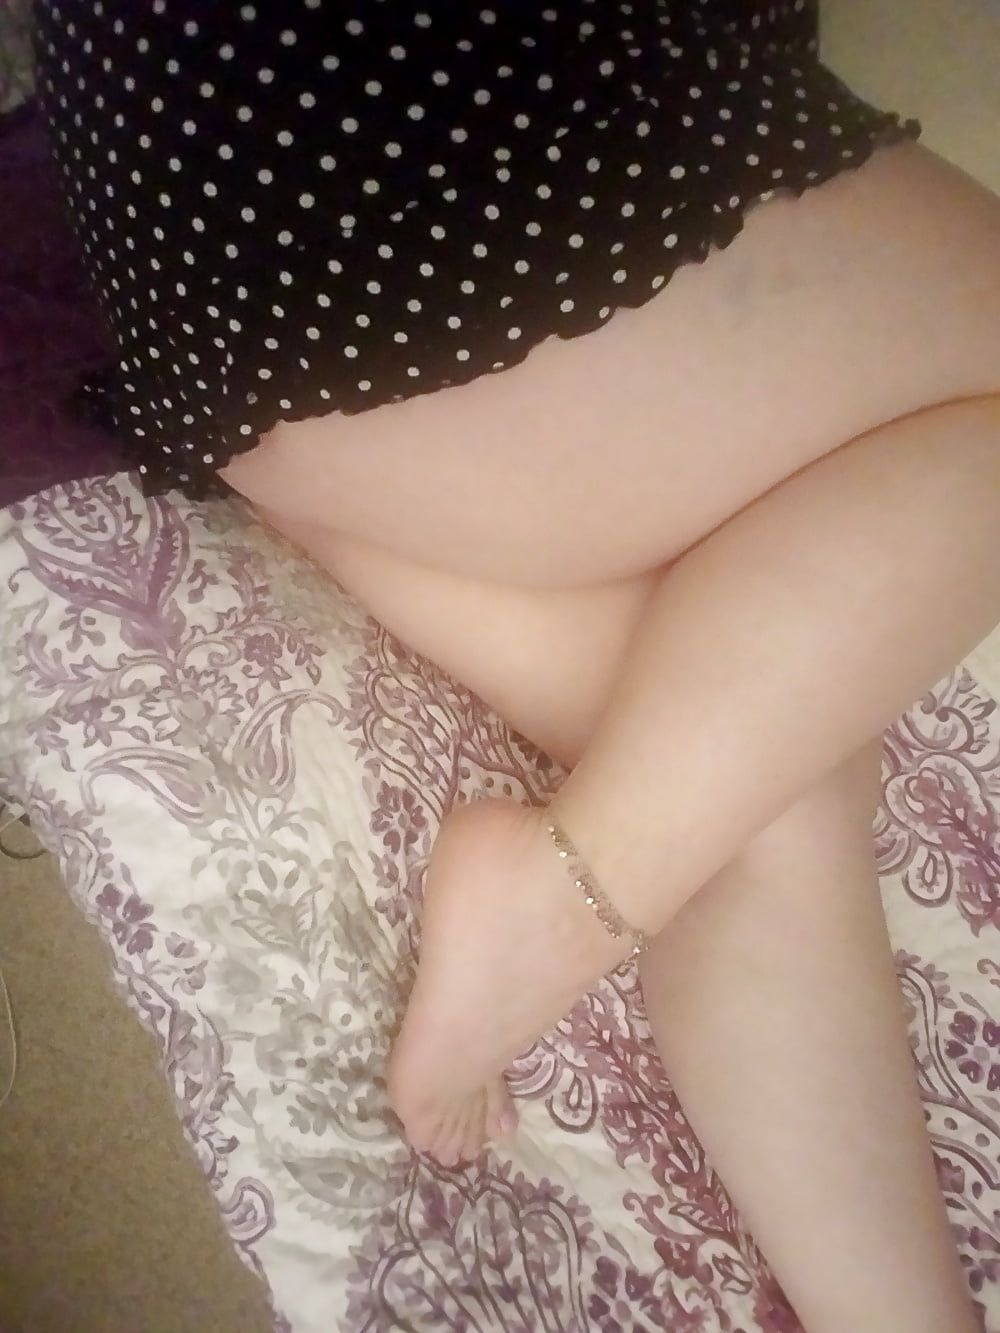 Feet, Legs, Heels & Boots of the Sweet Sexy Housewife  #3